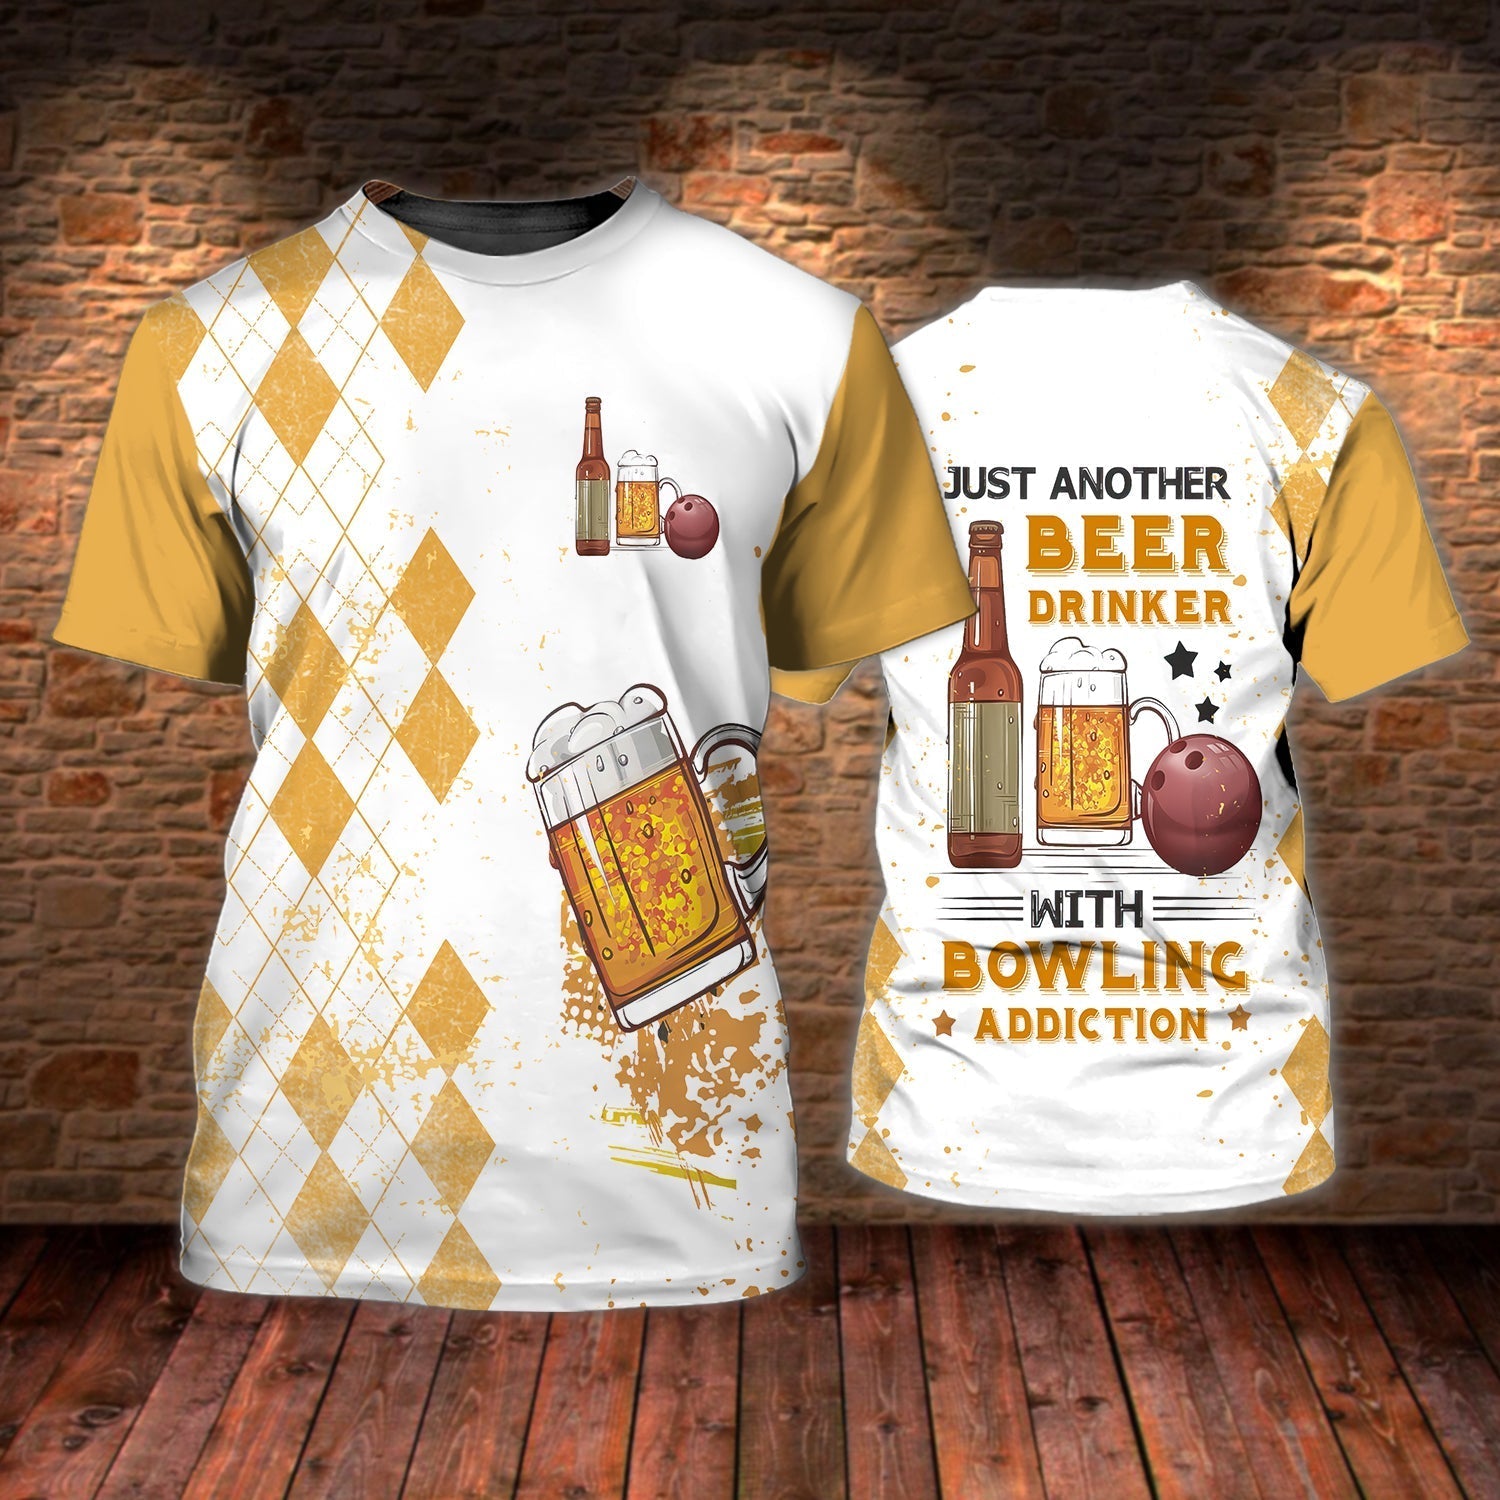 3D All Over Printed Bowling And Beer Tshirt For Men And Women/ Funny Bowling Shirt/ Bowlling T Shirts